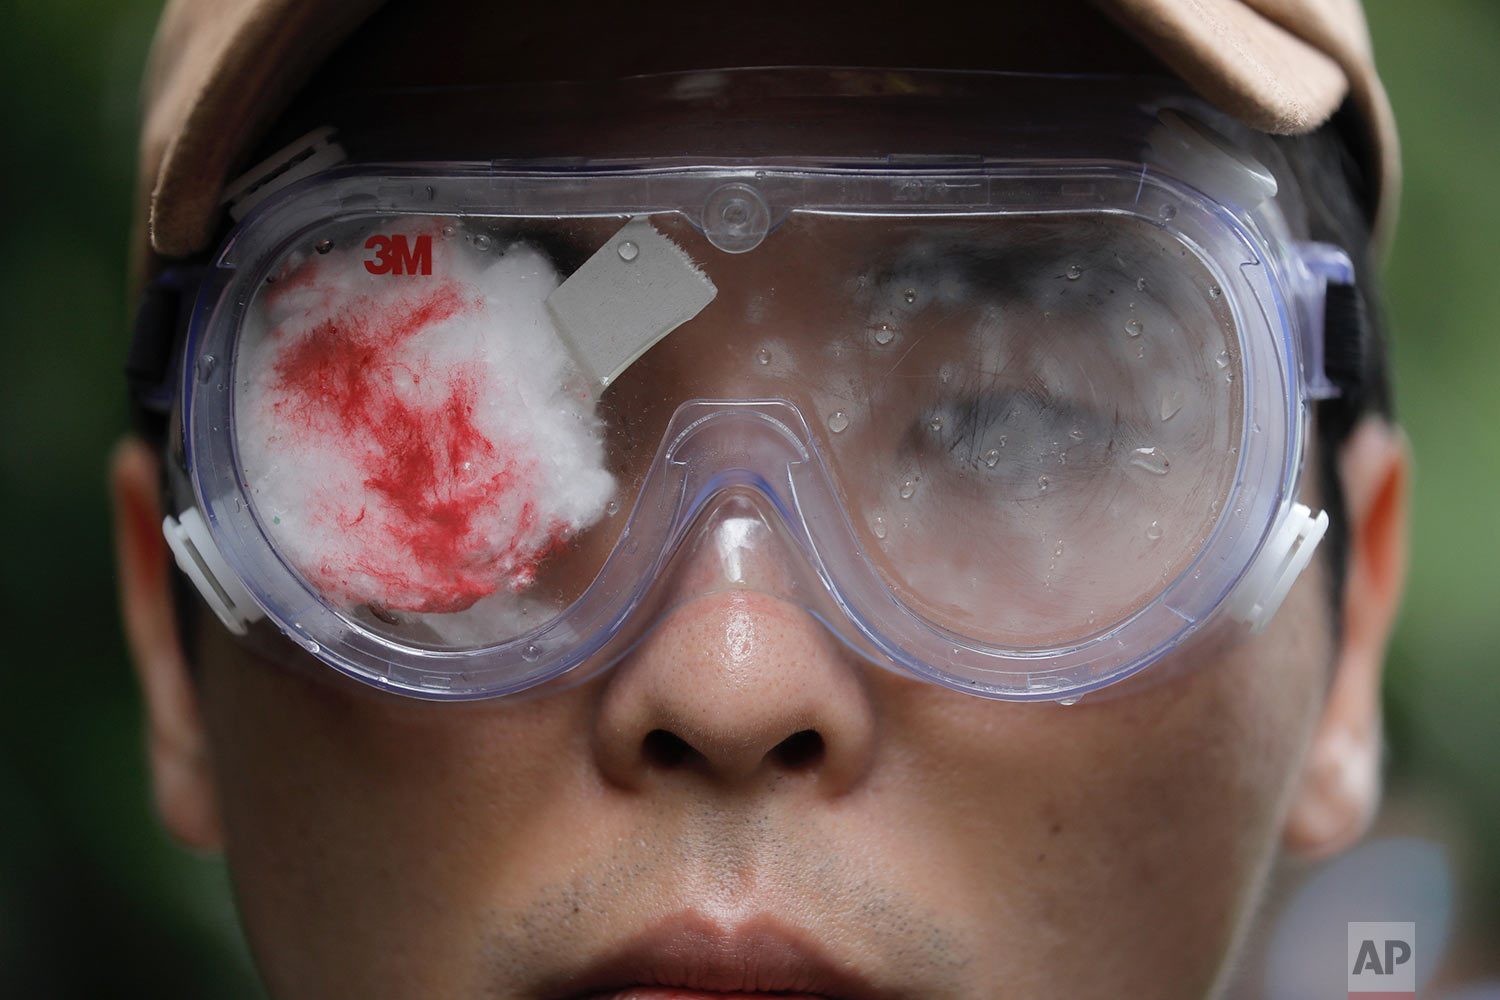  A pro-democracy protester with his eye covered in red-eyepatch, symbolizing a women reported to have had an eye ruptured by a beanbag round fired by police during clashes, participates in a march organized by teachers in Hong Kong Saturday, Aug. 17,